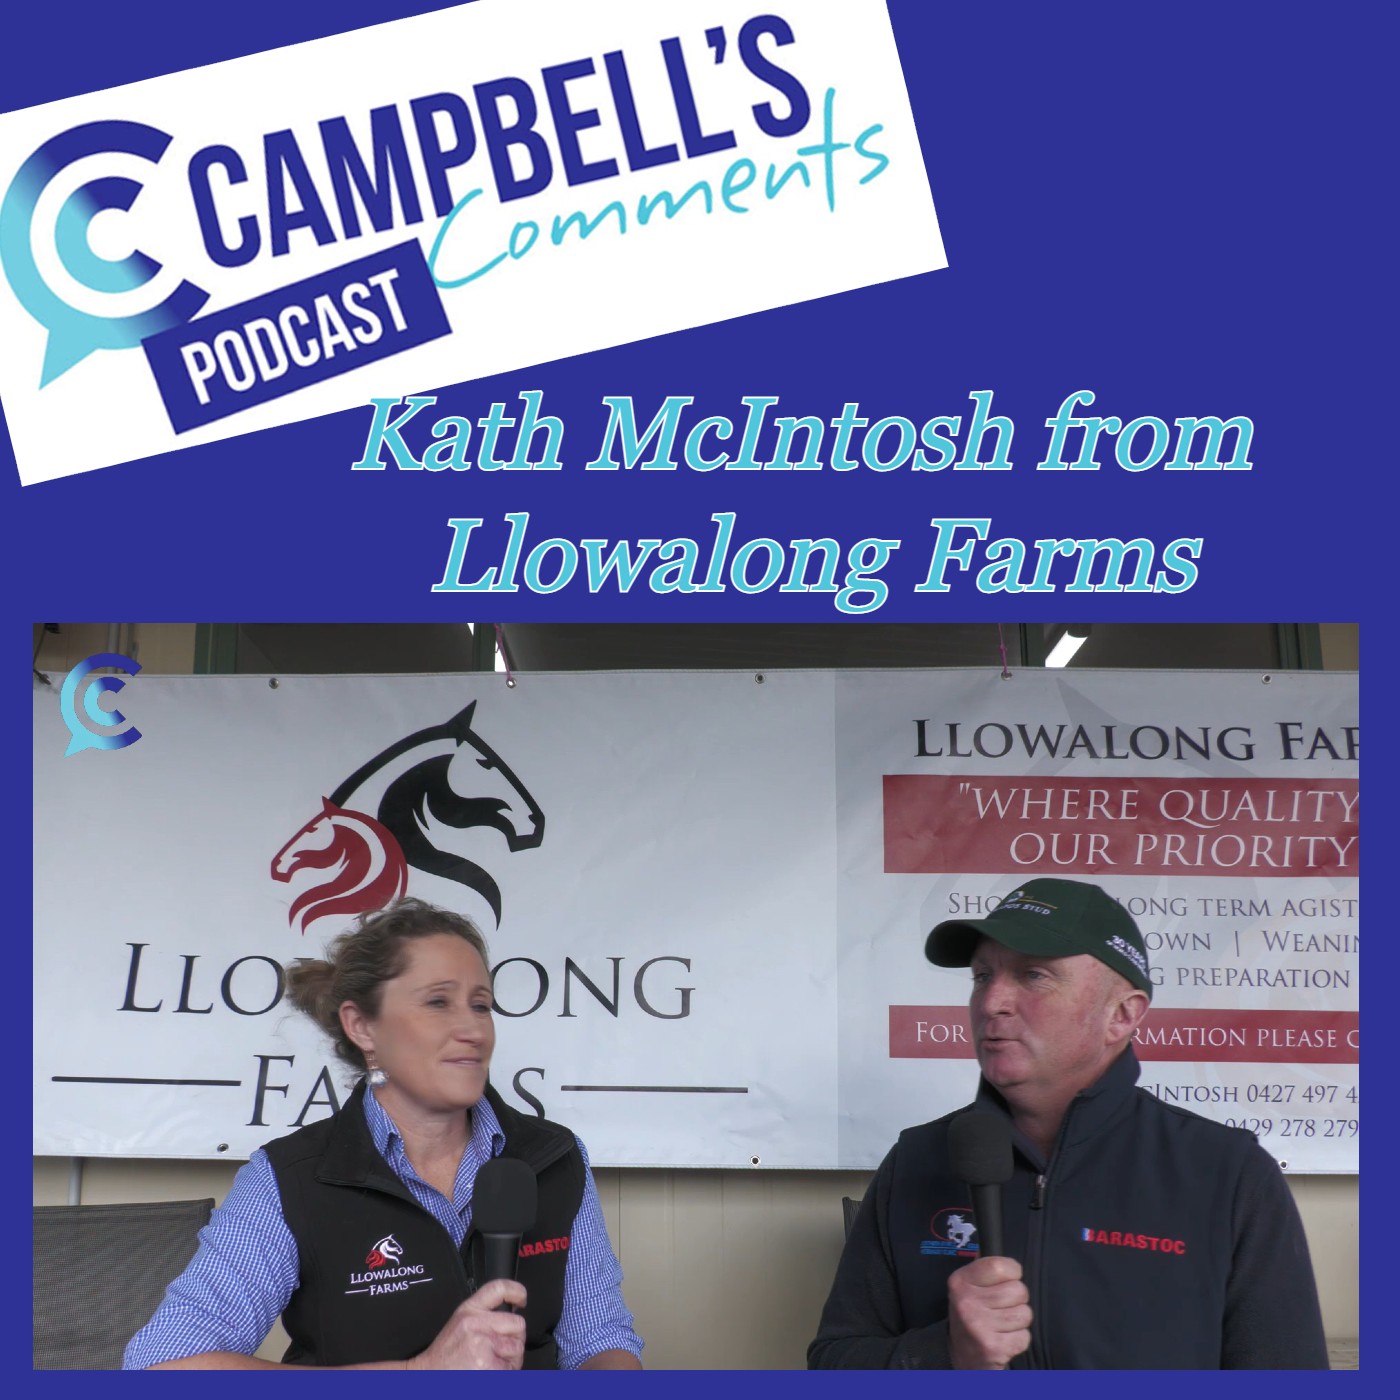 You are currently viewing 163: Campbells Comments with Kath McIntosh from Llowalong farms